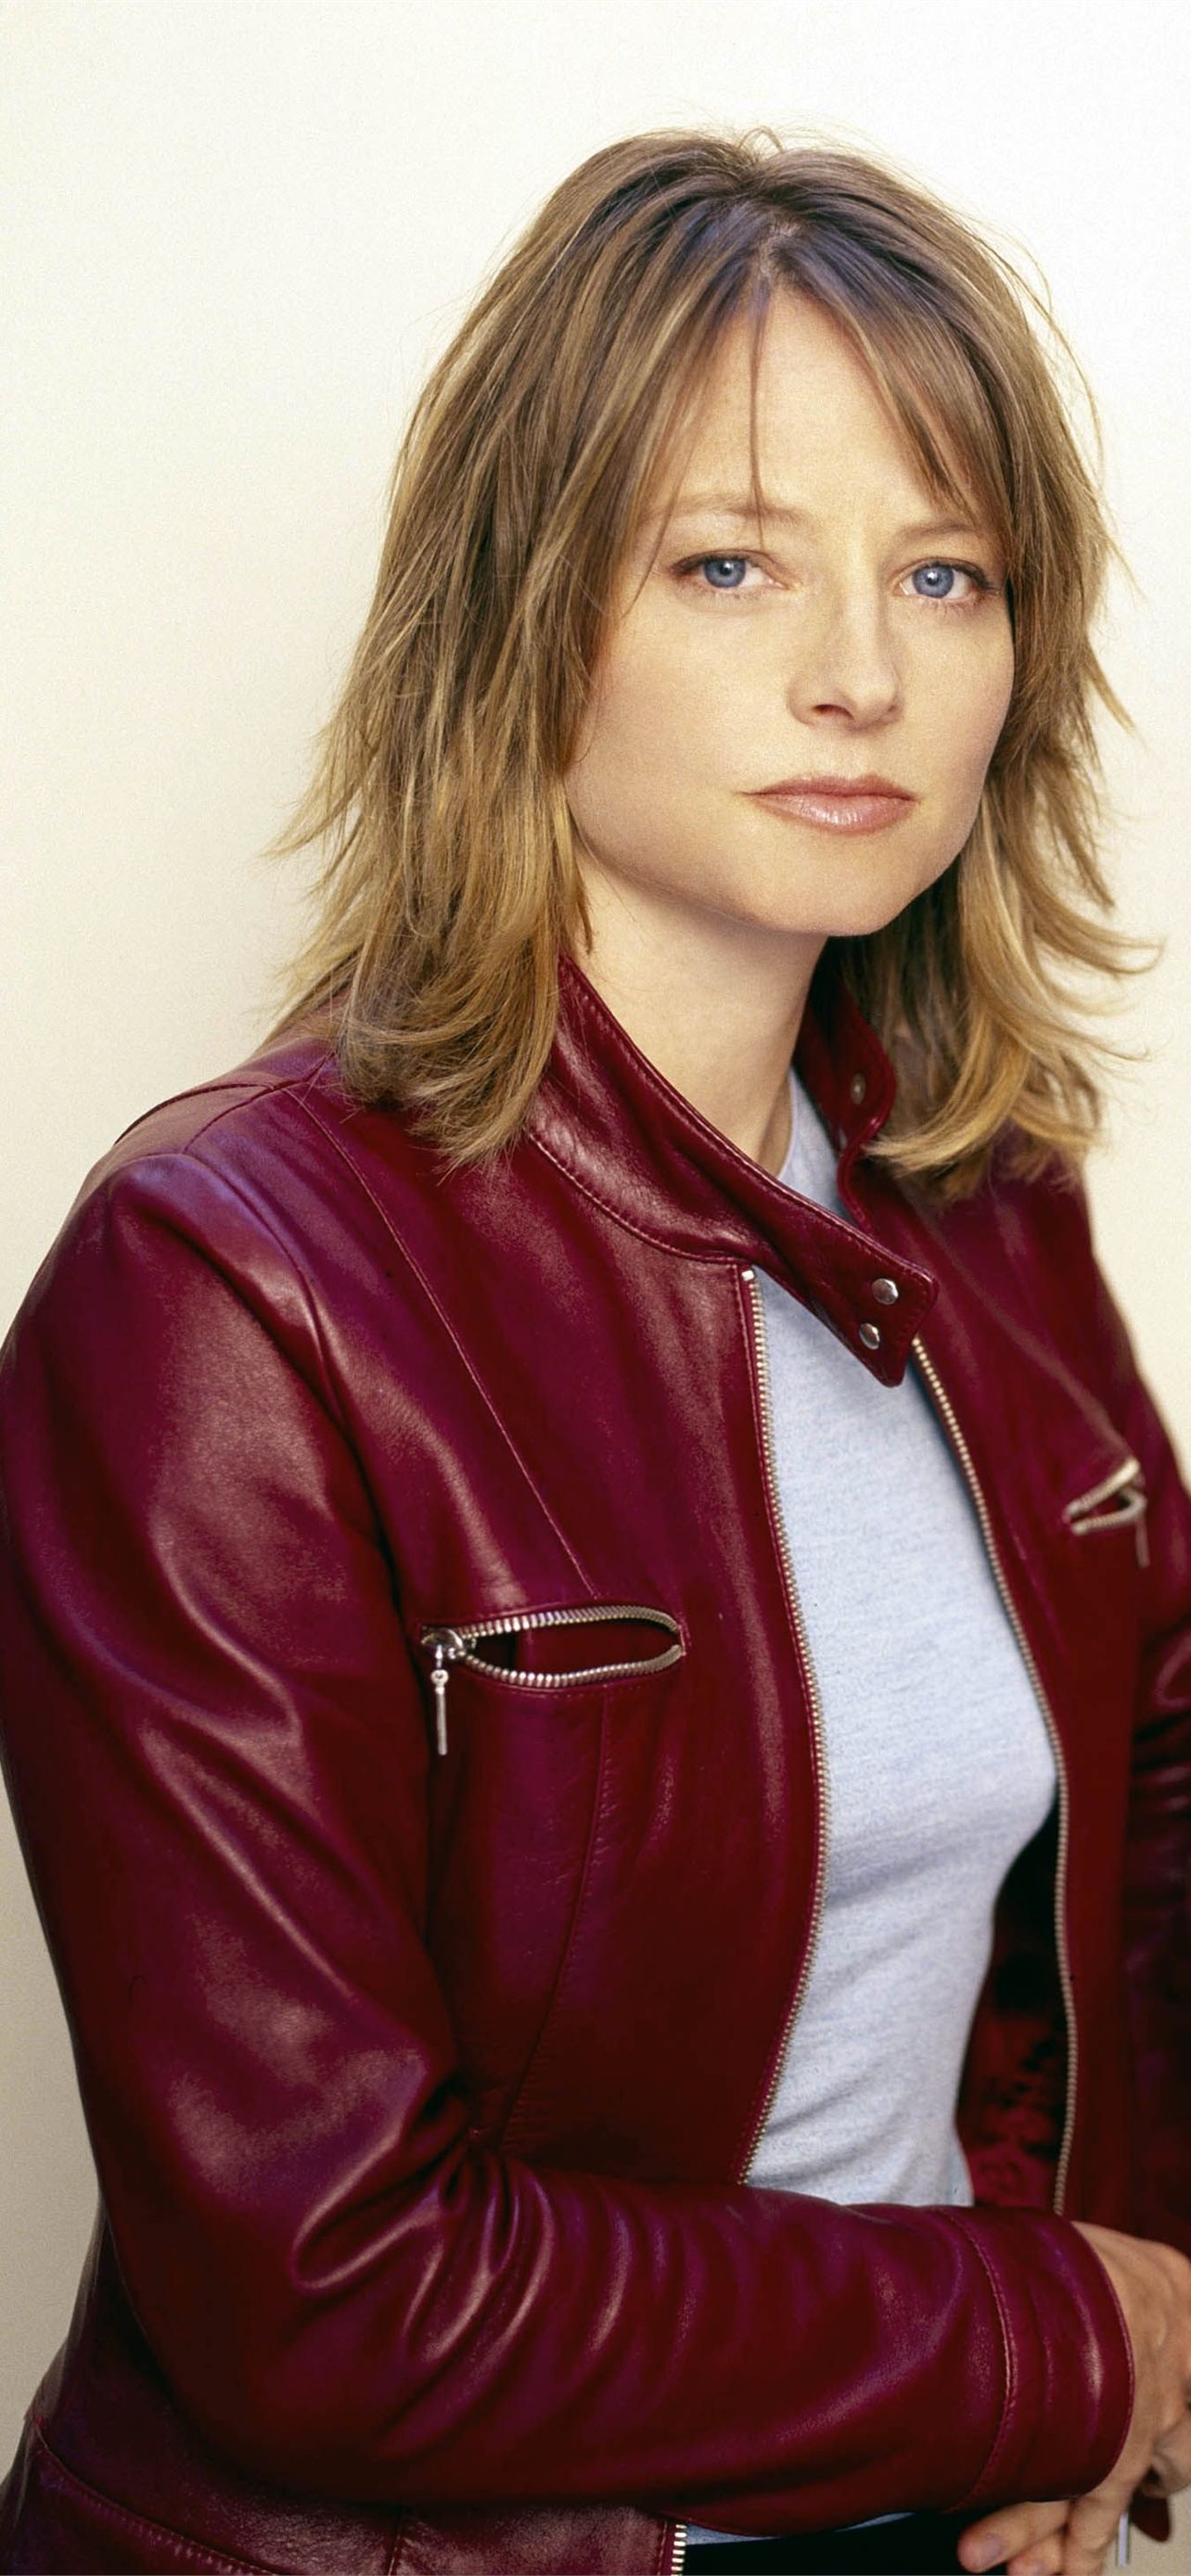 Best iPhone wallpapers, Jodie Foster, High-quality images, Stylish, 1290x2780 HD Phone